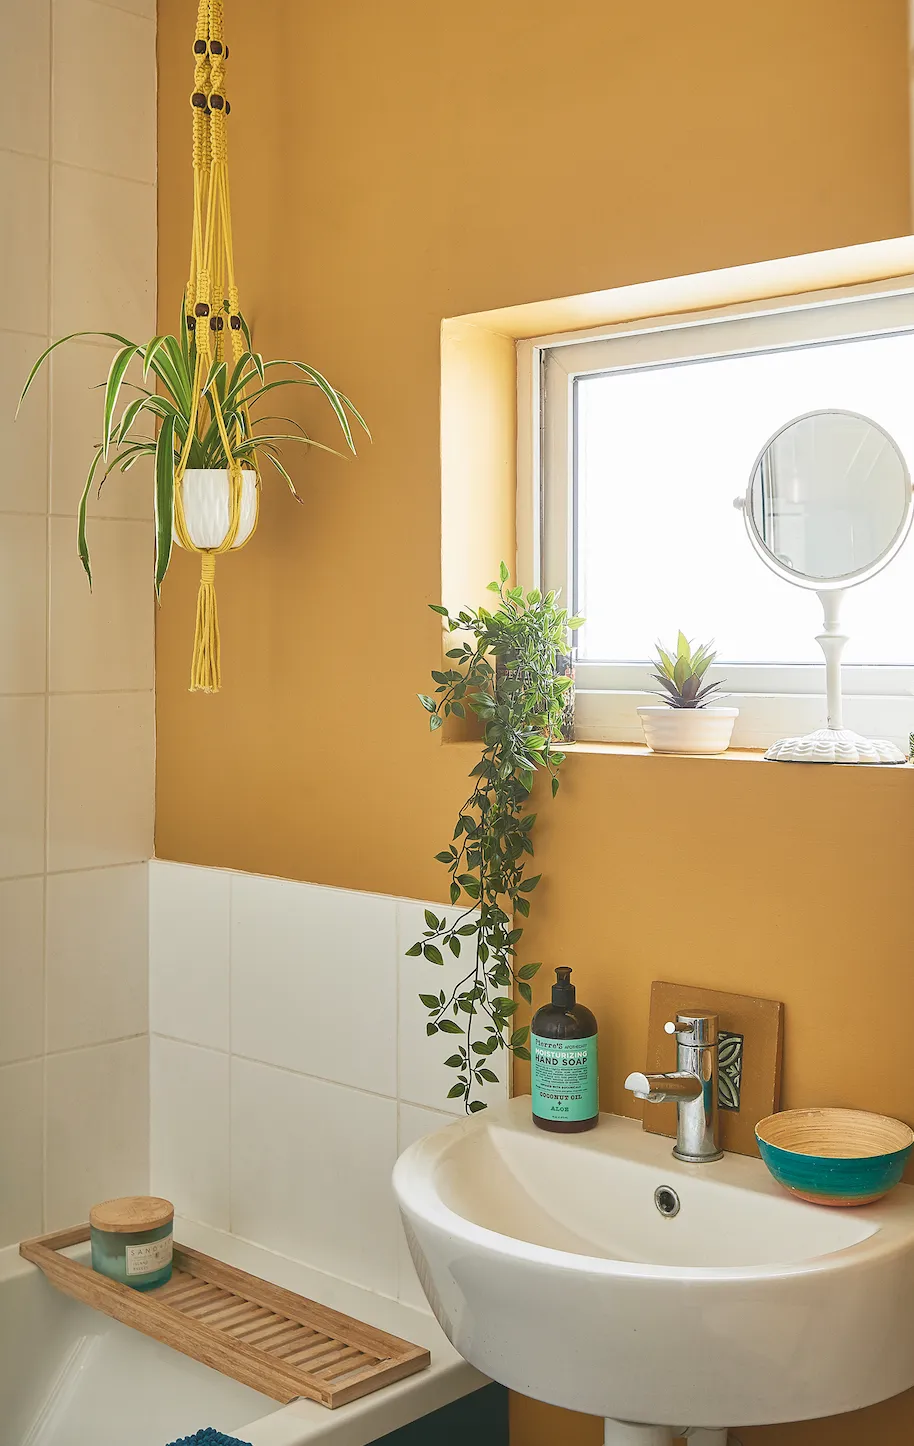 A dab hand at using colour in unexpected ways, Nikki hasn’t gone for classic blue for her bathroom, instead painting it a rich yellow to energise the family’s morning routine